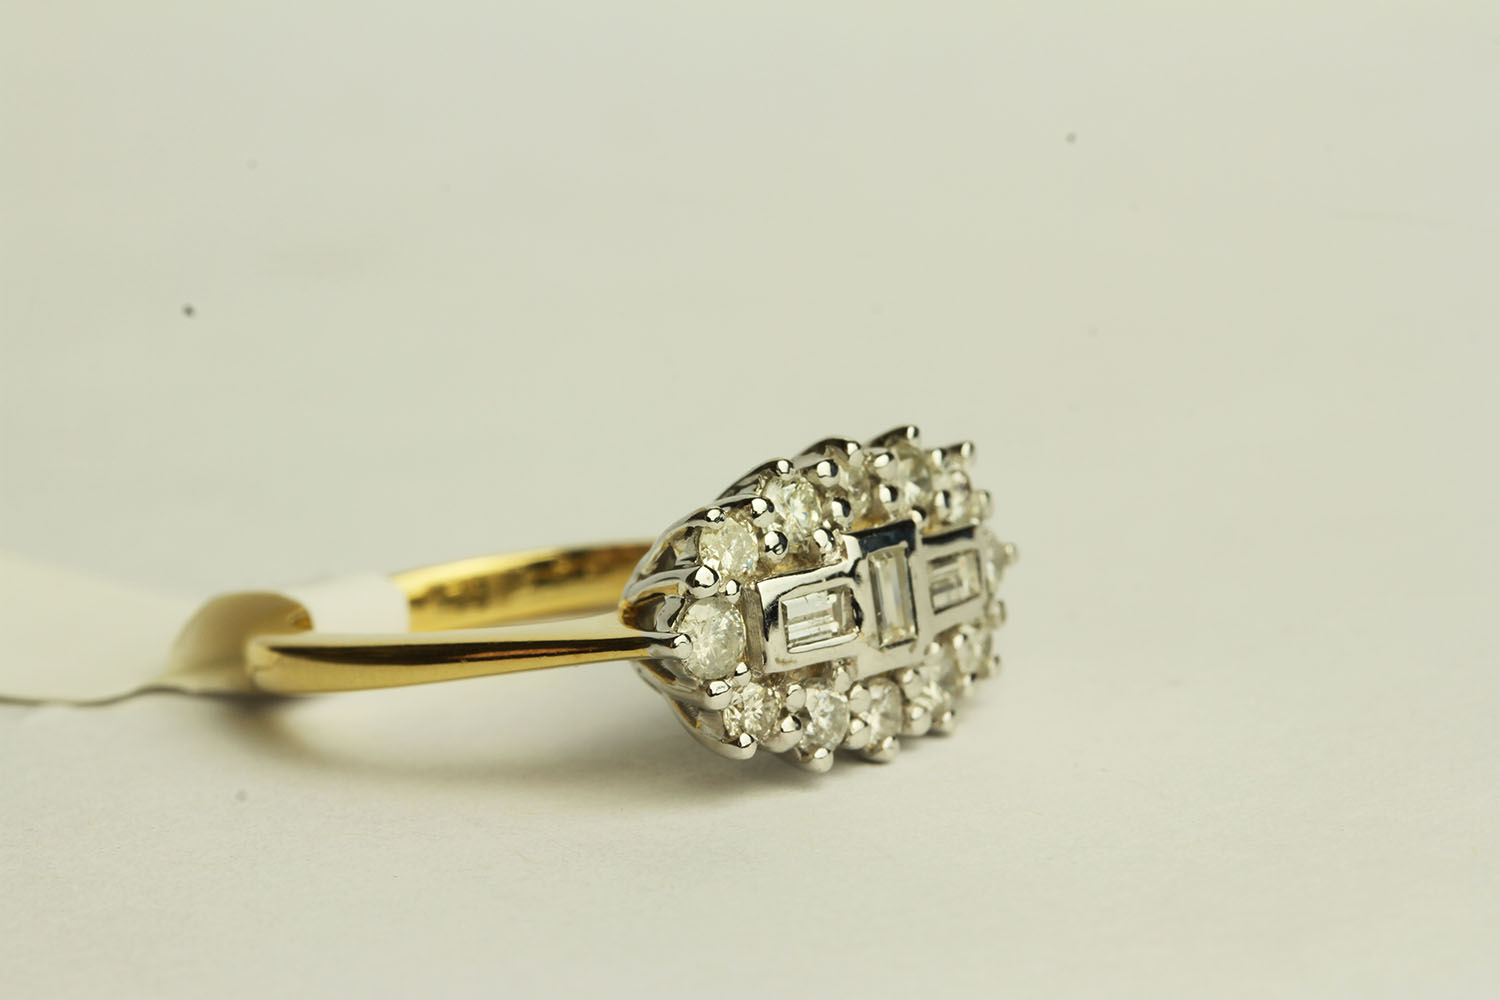 Unusual Diamond Cluster Ring, set with baguette cut and round brilliant diamonds - Image 2 of 3